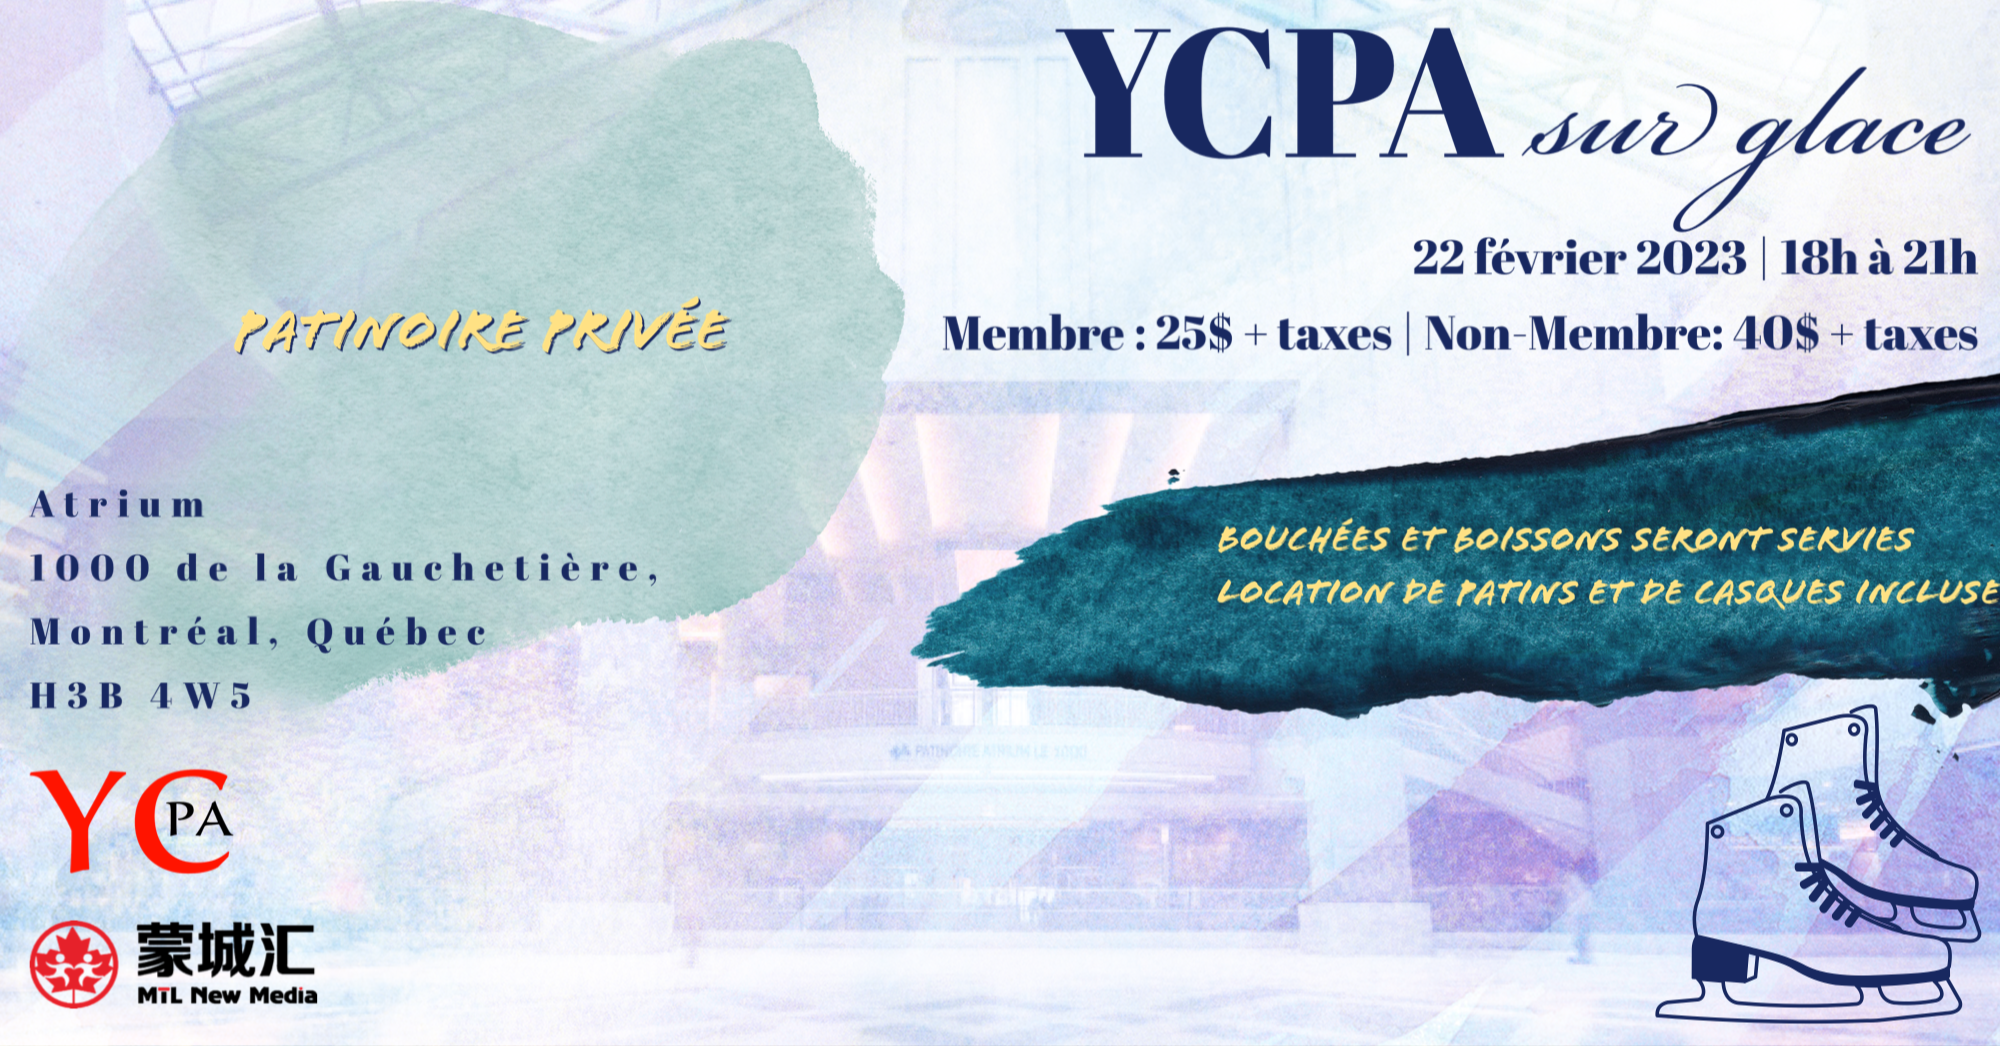 YCPA sur Glace